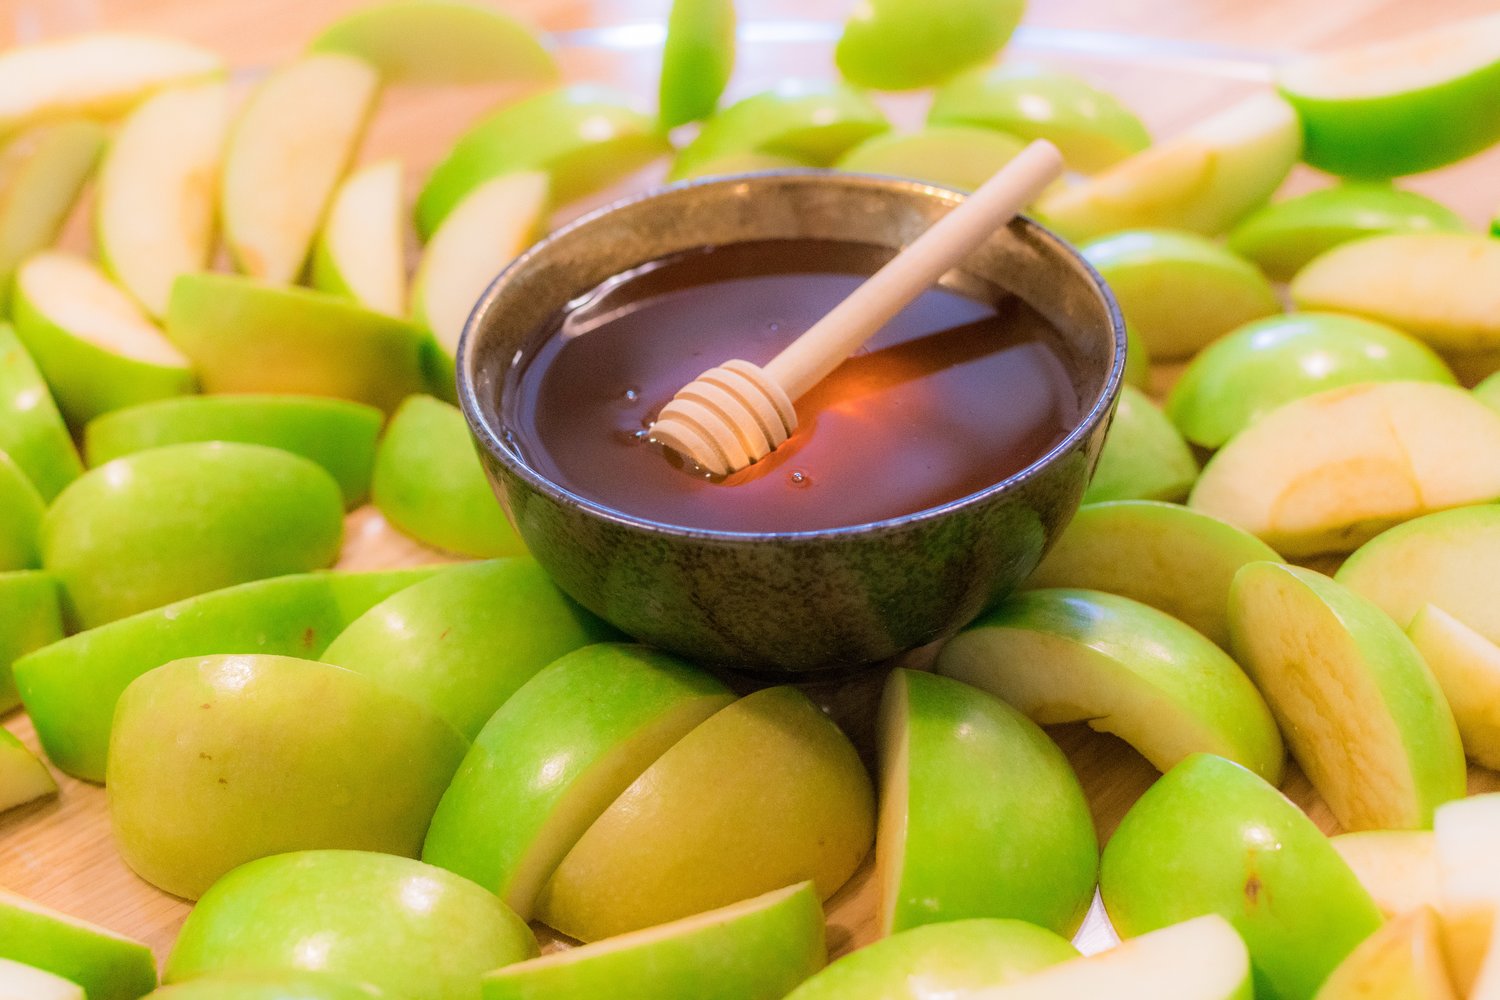 Sweet foods are popular during Rosh Hashana, particularly apples dipped in honey. The hope is that eating them will usher in a sweet year.